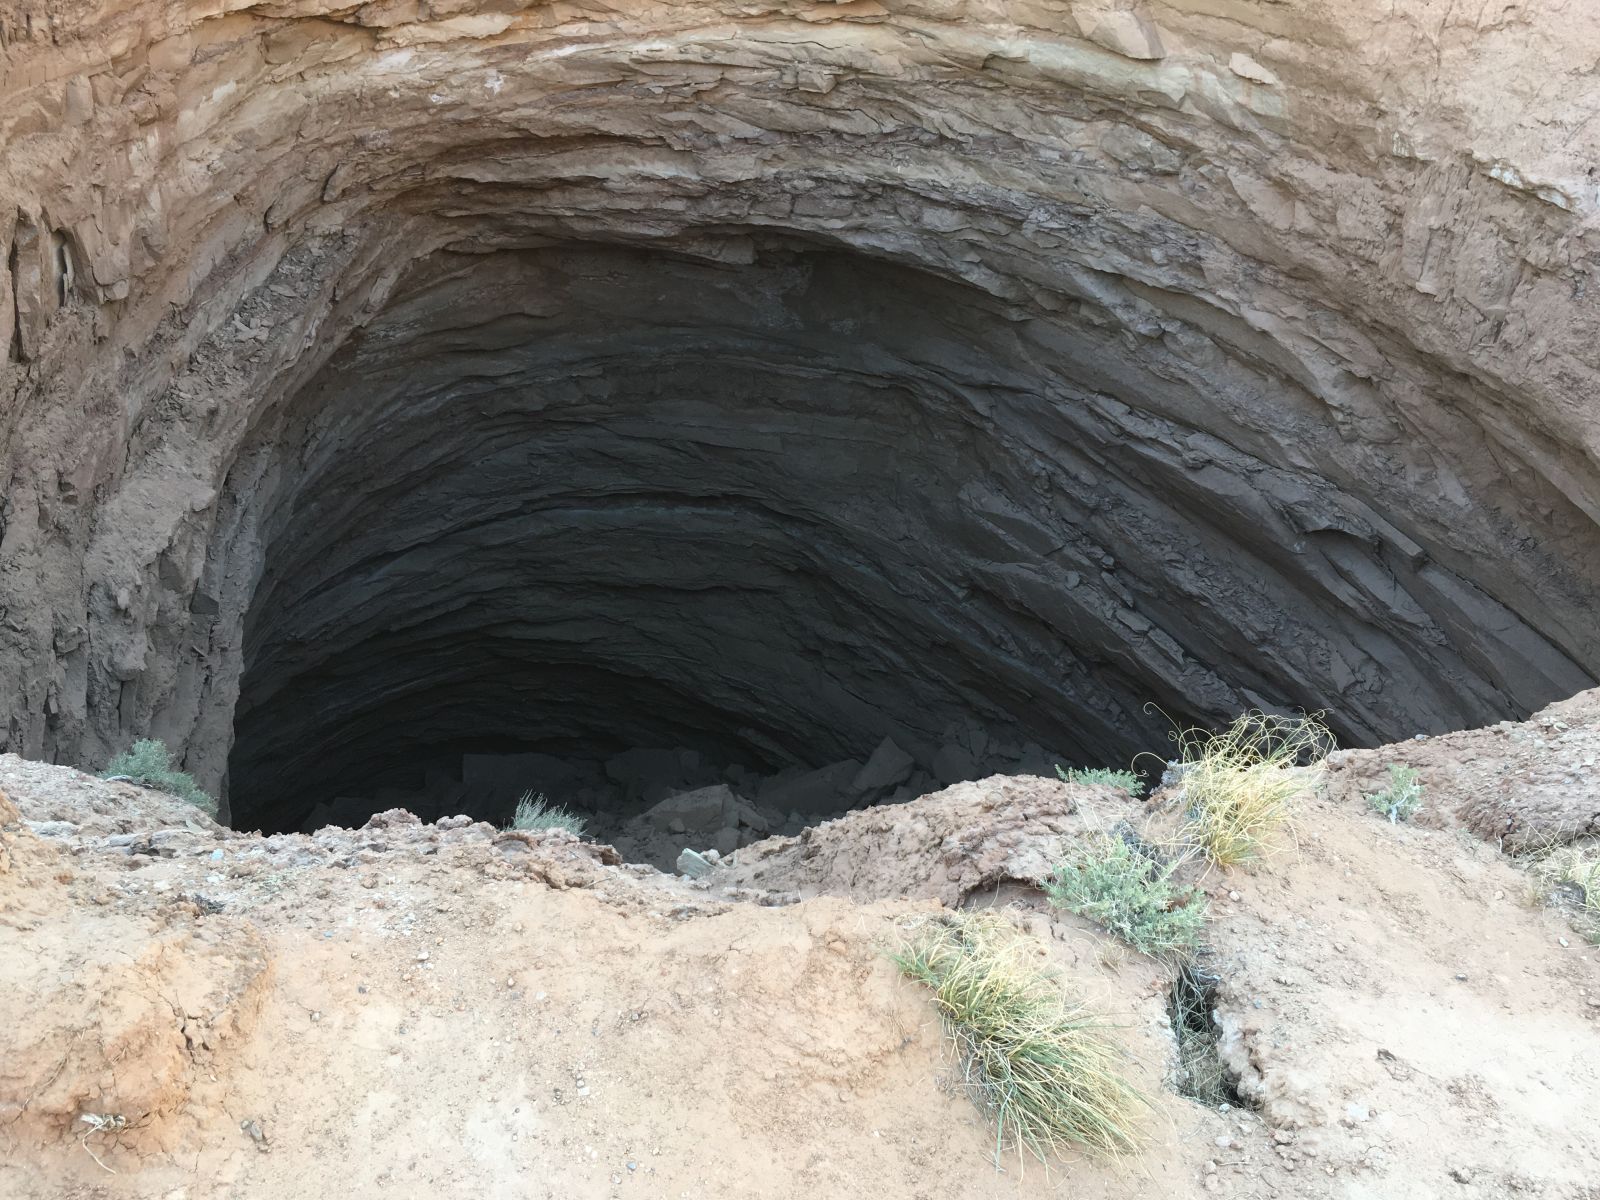 The Great Pit of Carkoon, waiting for the Almighty Sarlacc to appear. (Maybe it’s just the Gypsum Sinkhole.)